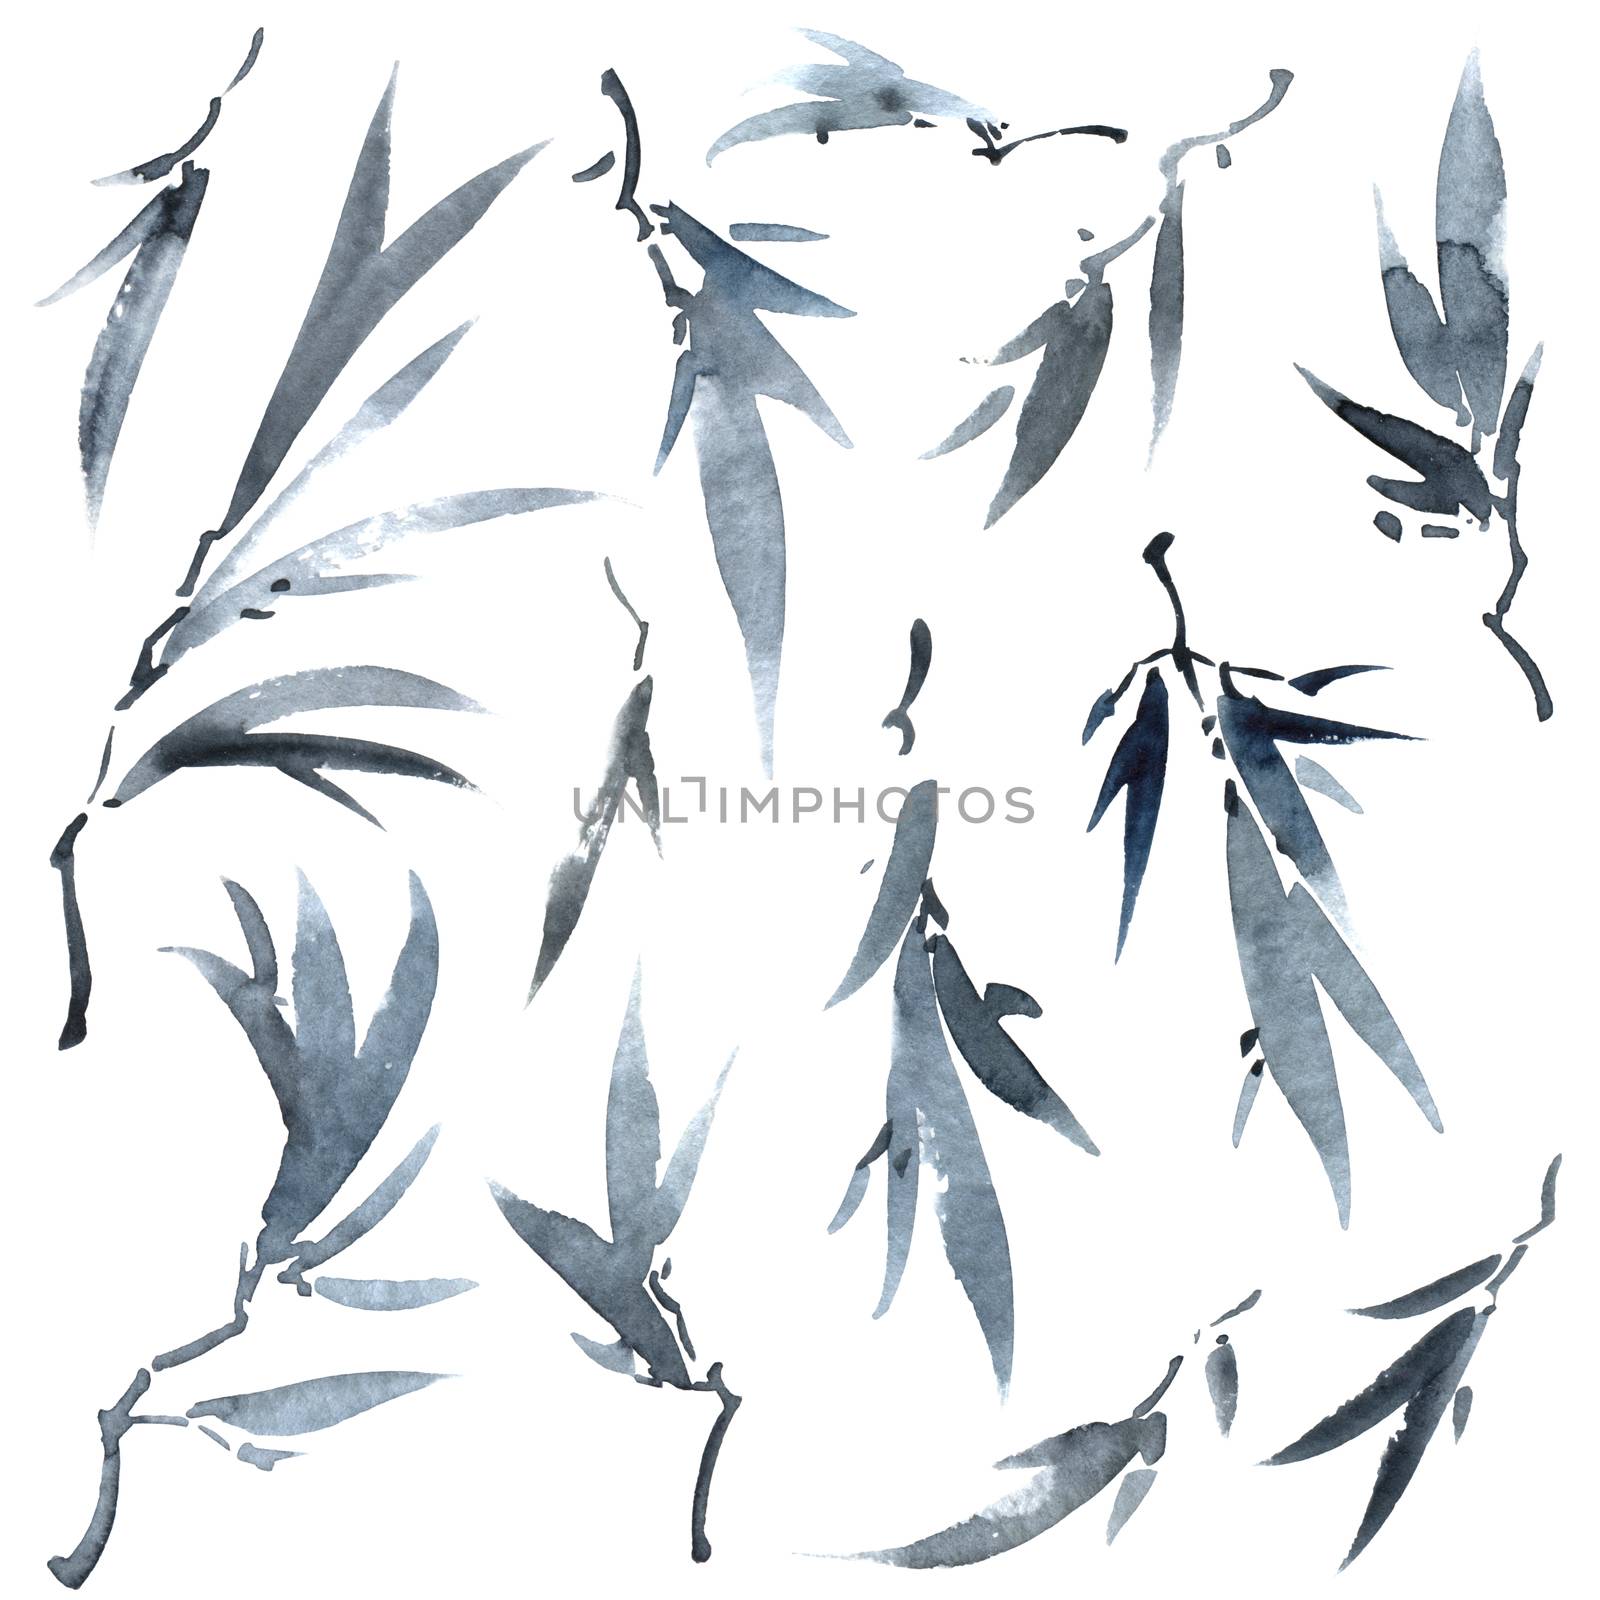 Watercolor and ink illustration of tree leaves in style sumi-e, u-sin. Oriental traditional painting.